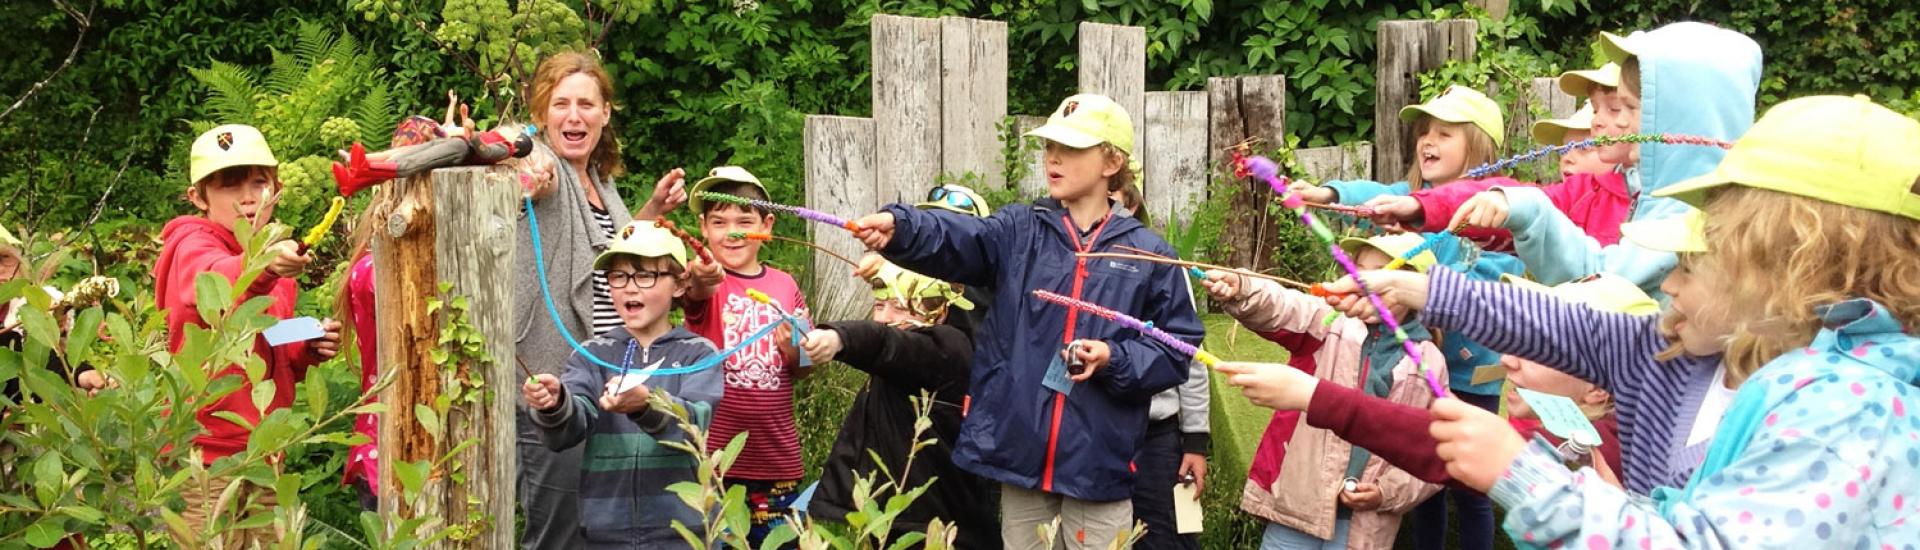 A school group learning outdoors